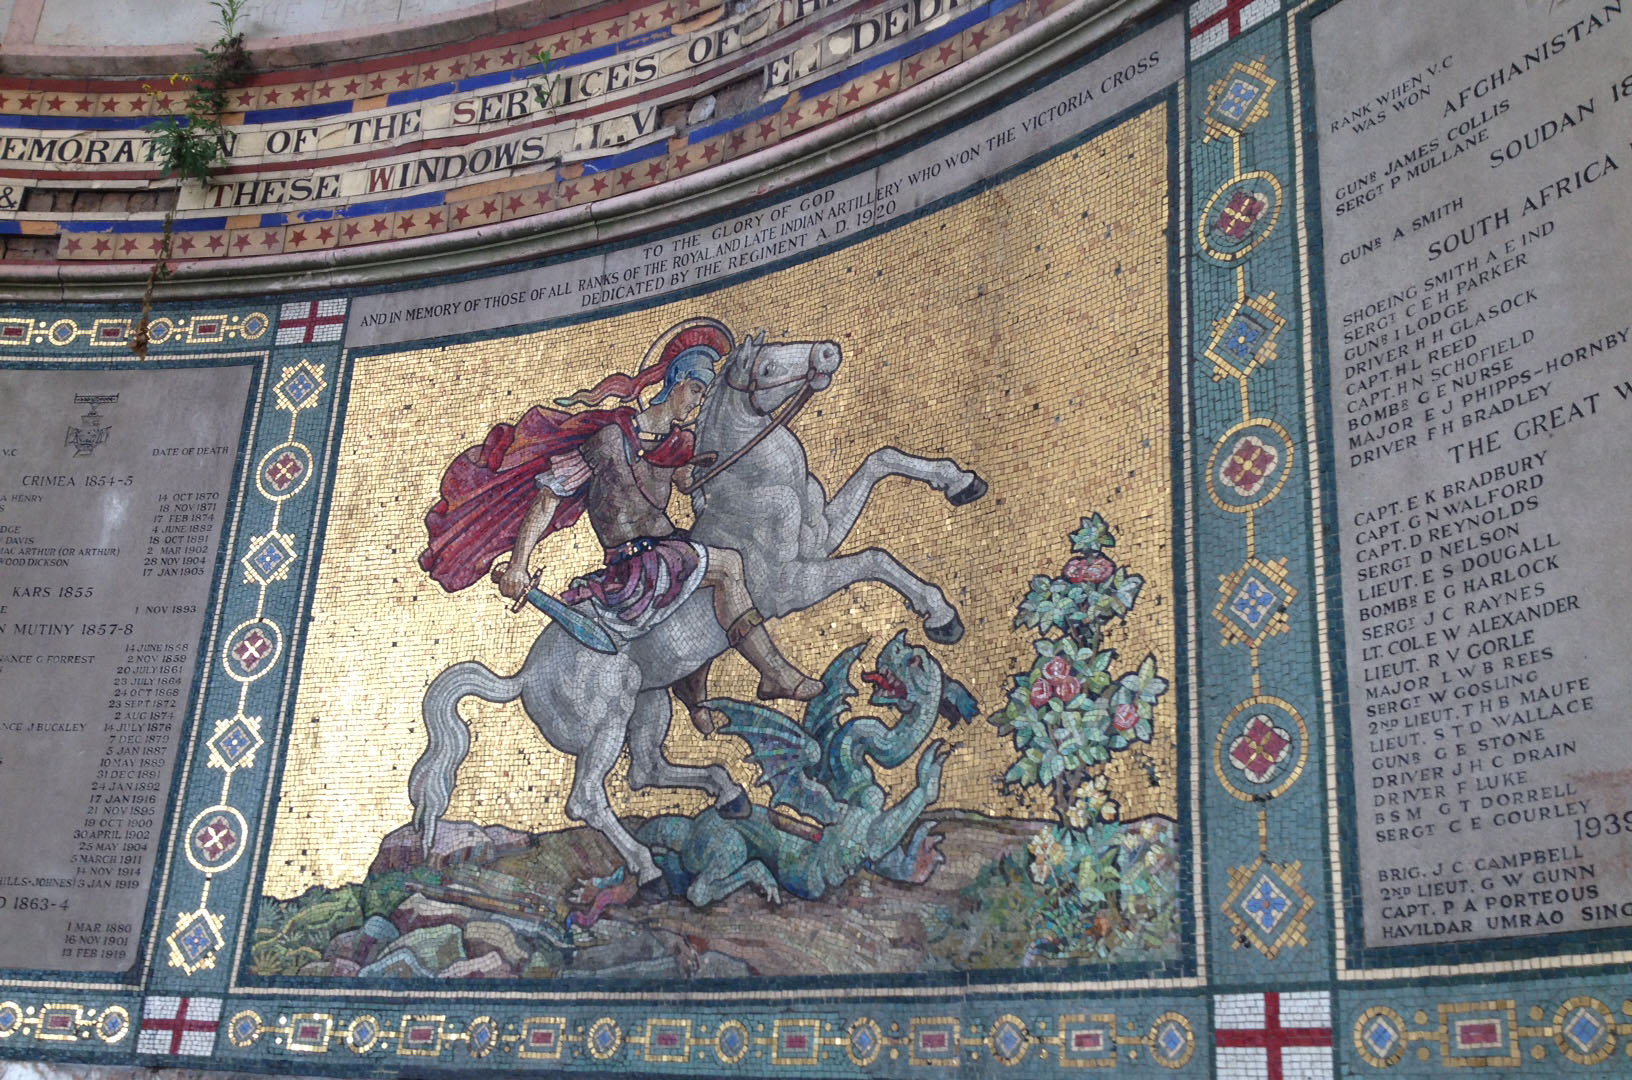 Mosaic of St George on a white horse slaying a dragon